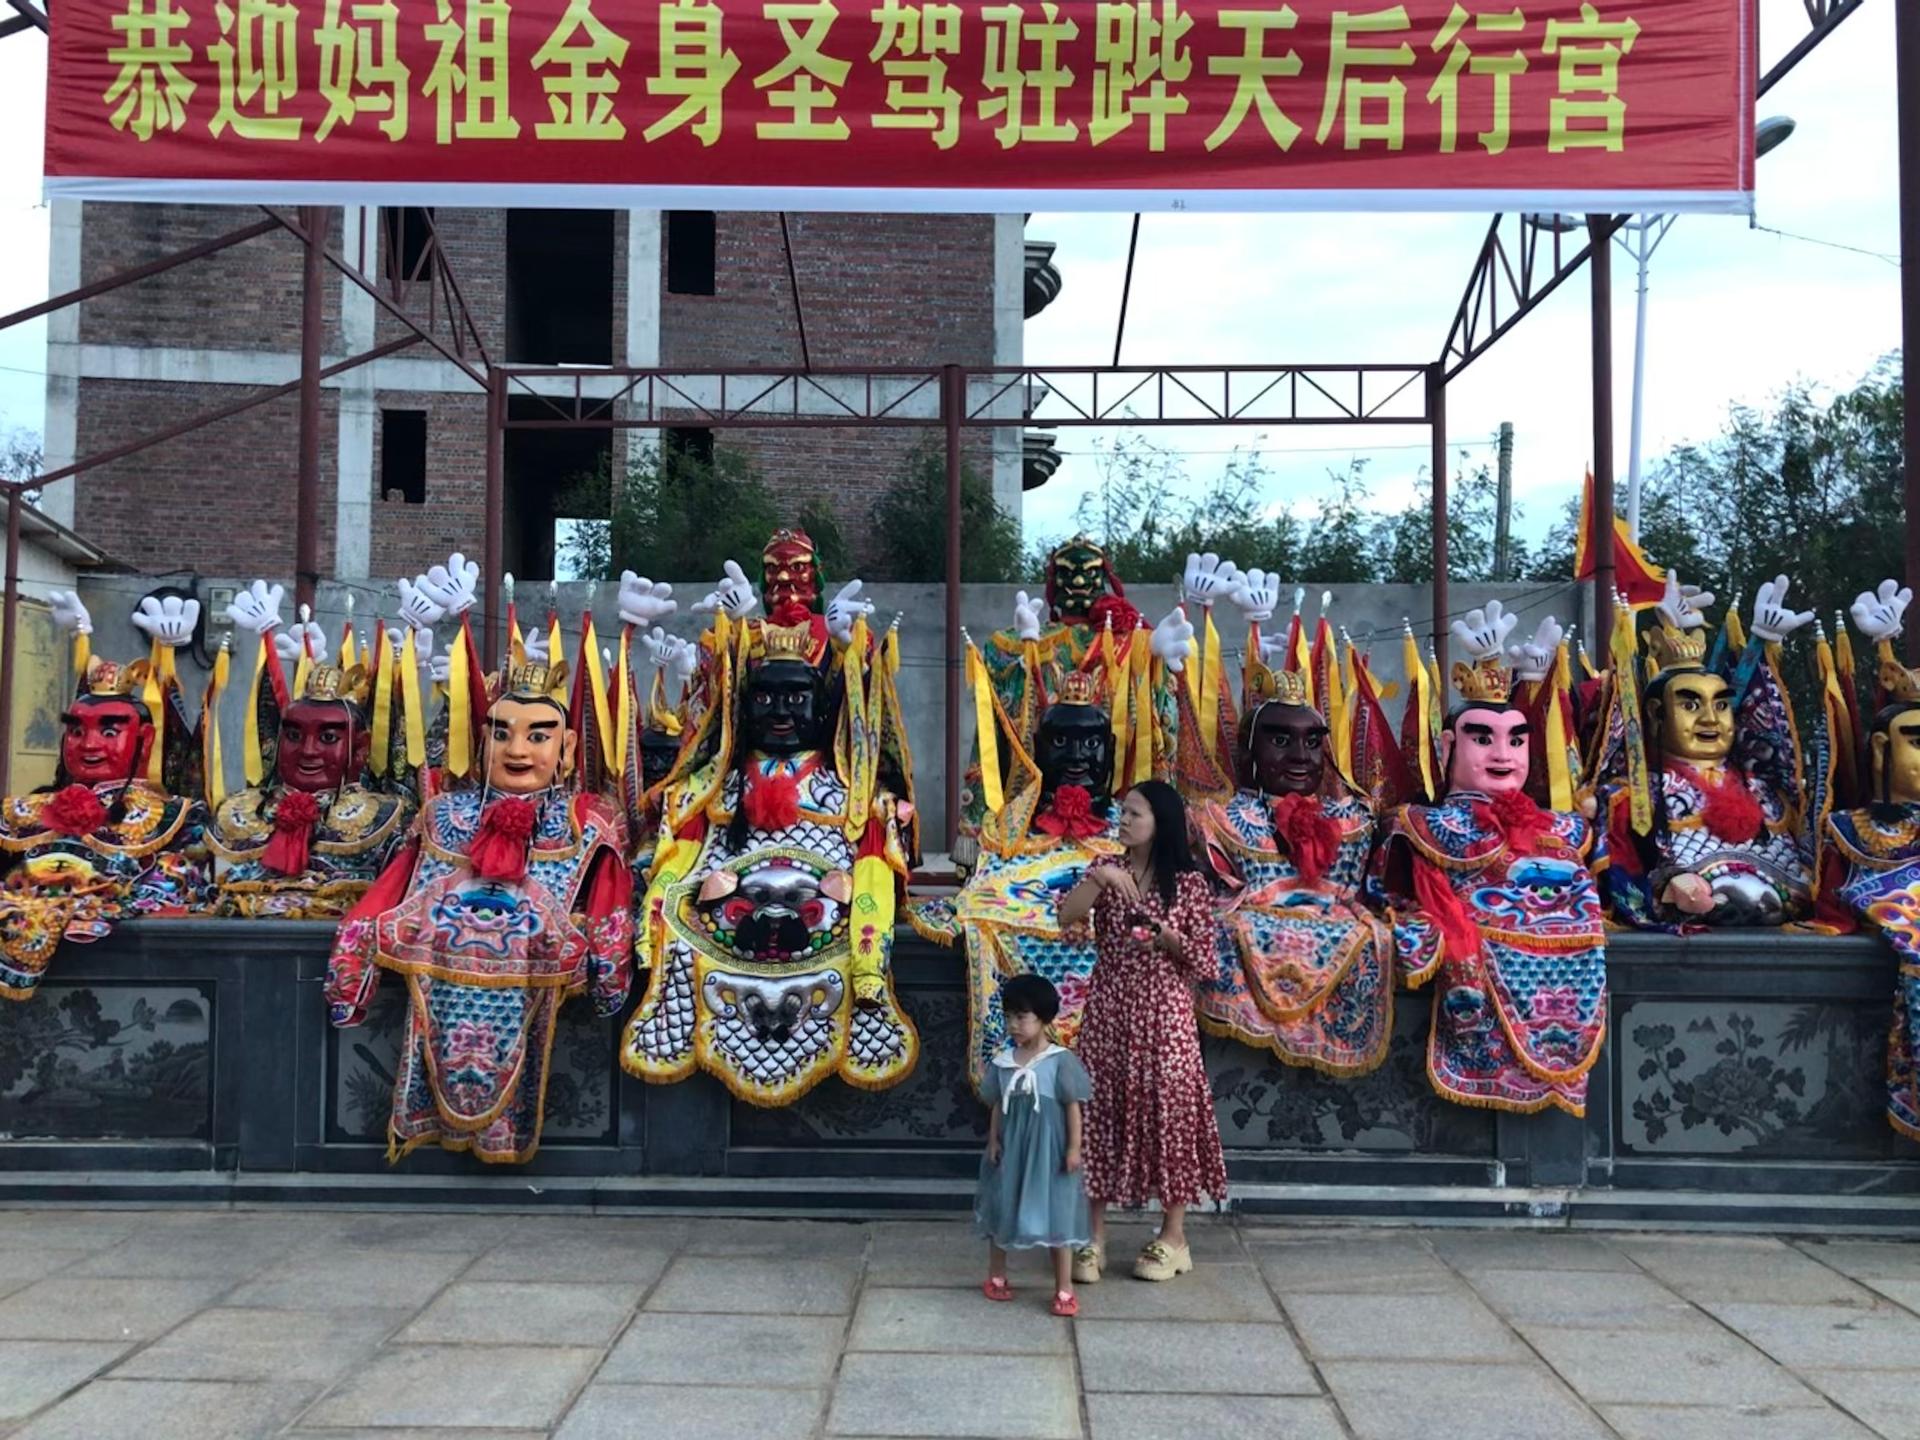 Puppet costumes at Xinggong Temple on Meizhou Island, China.